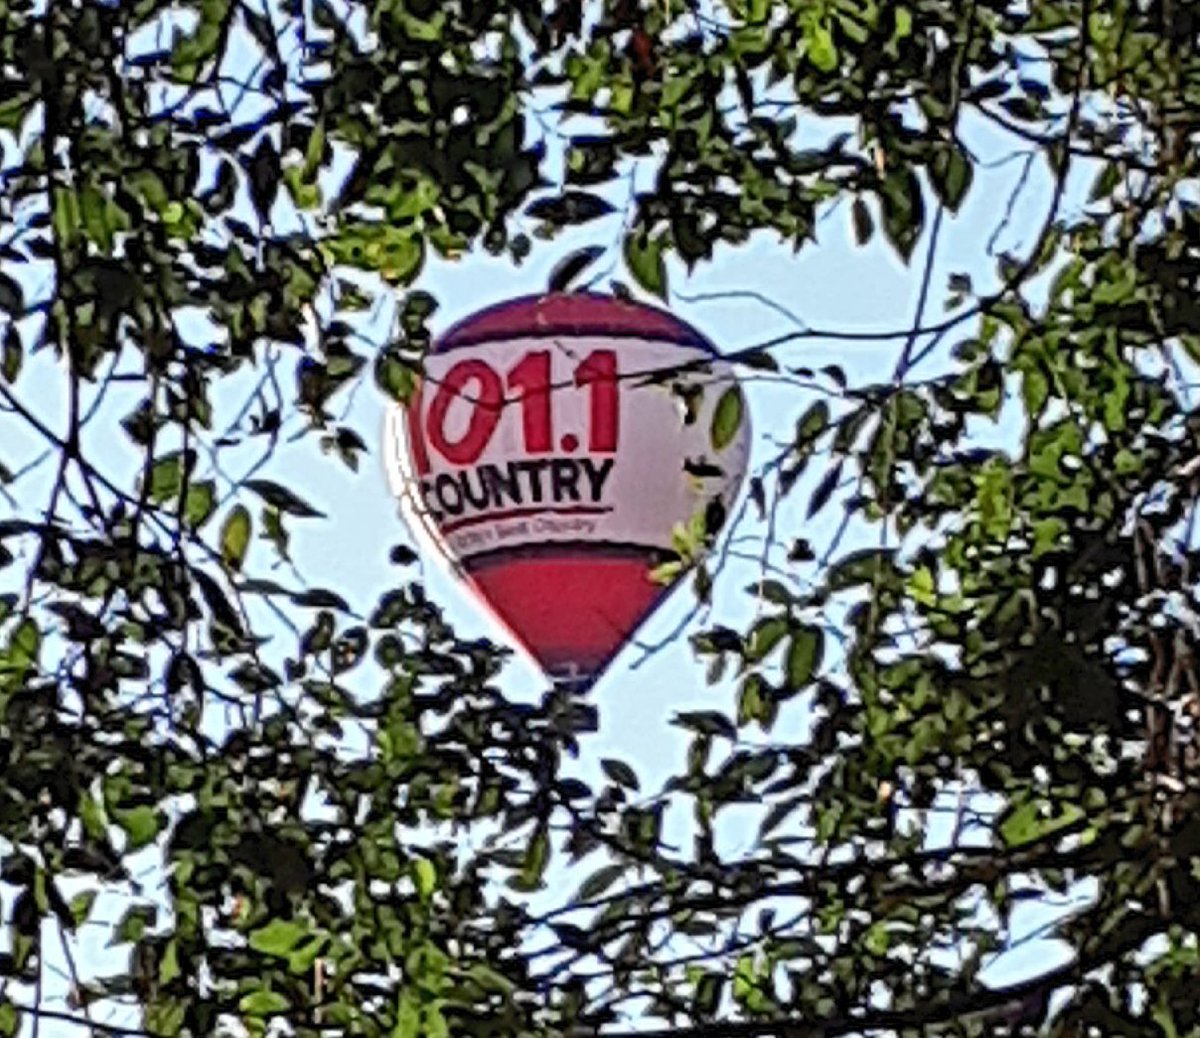 Just saw the Country 101.1 balloon in the air! 🎈 @country1011fm @NanCountry1011 @Country1011AK #ottawasouth 🎸🎤🎶🎻🎵